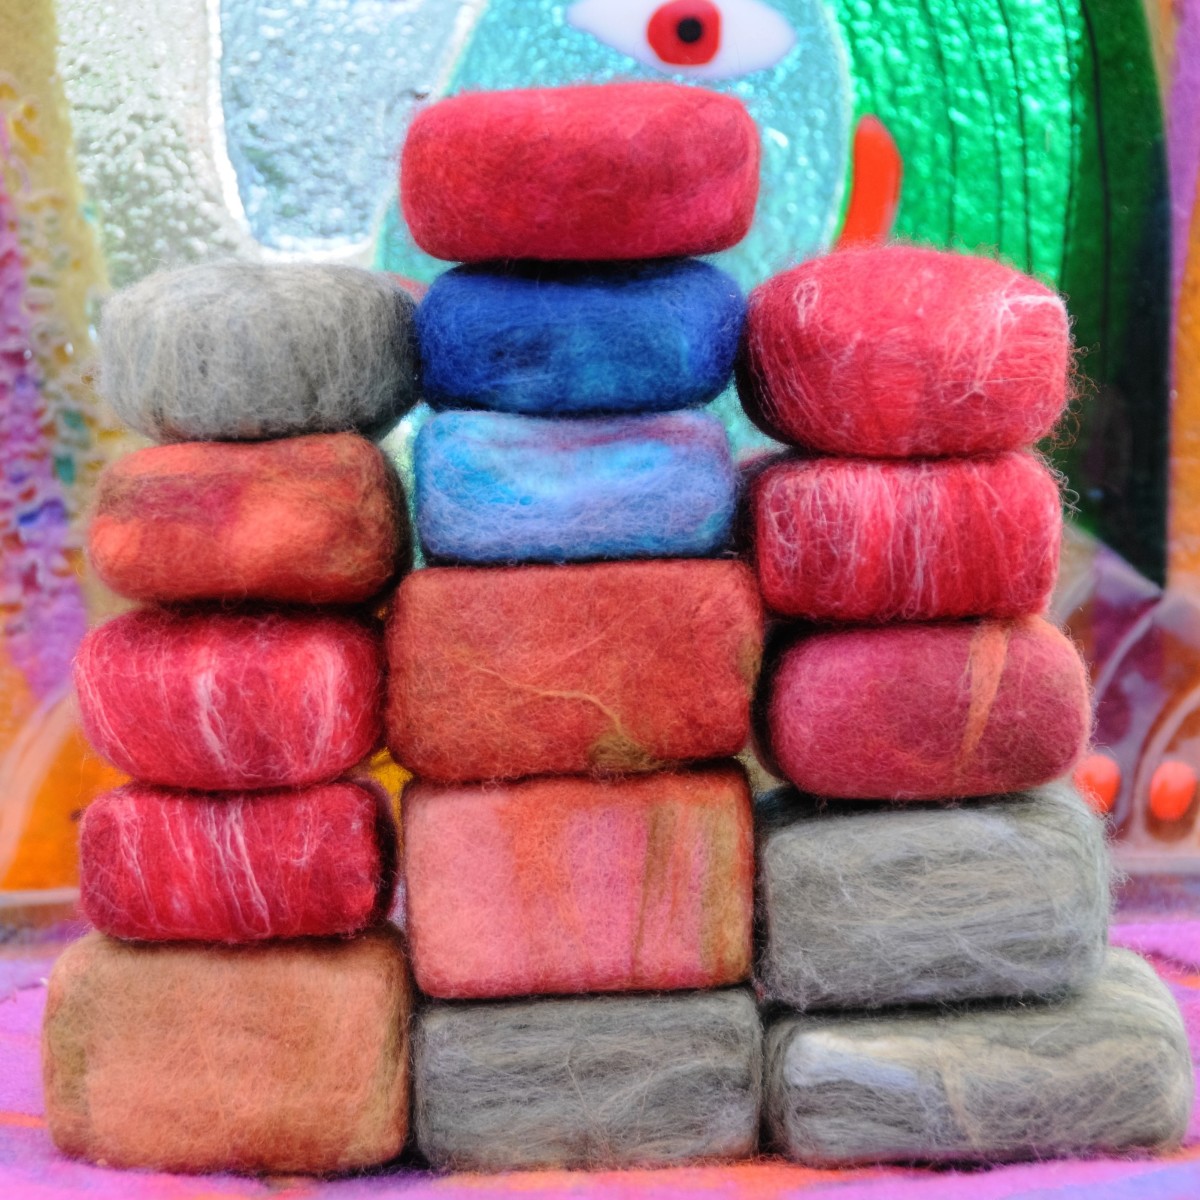 Wet-felted soaps make great gifts for Xmas or anytime!